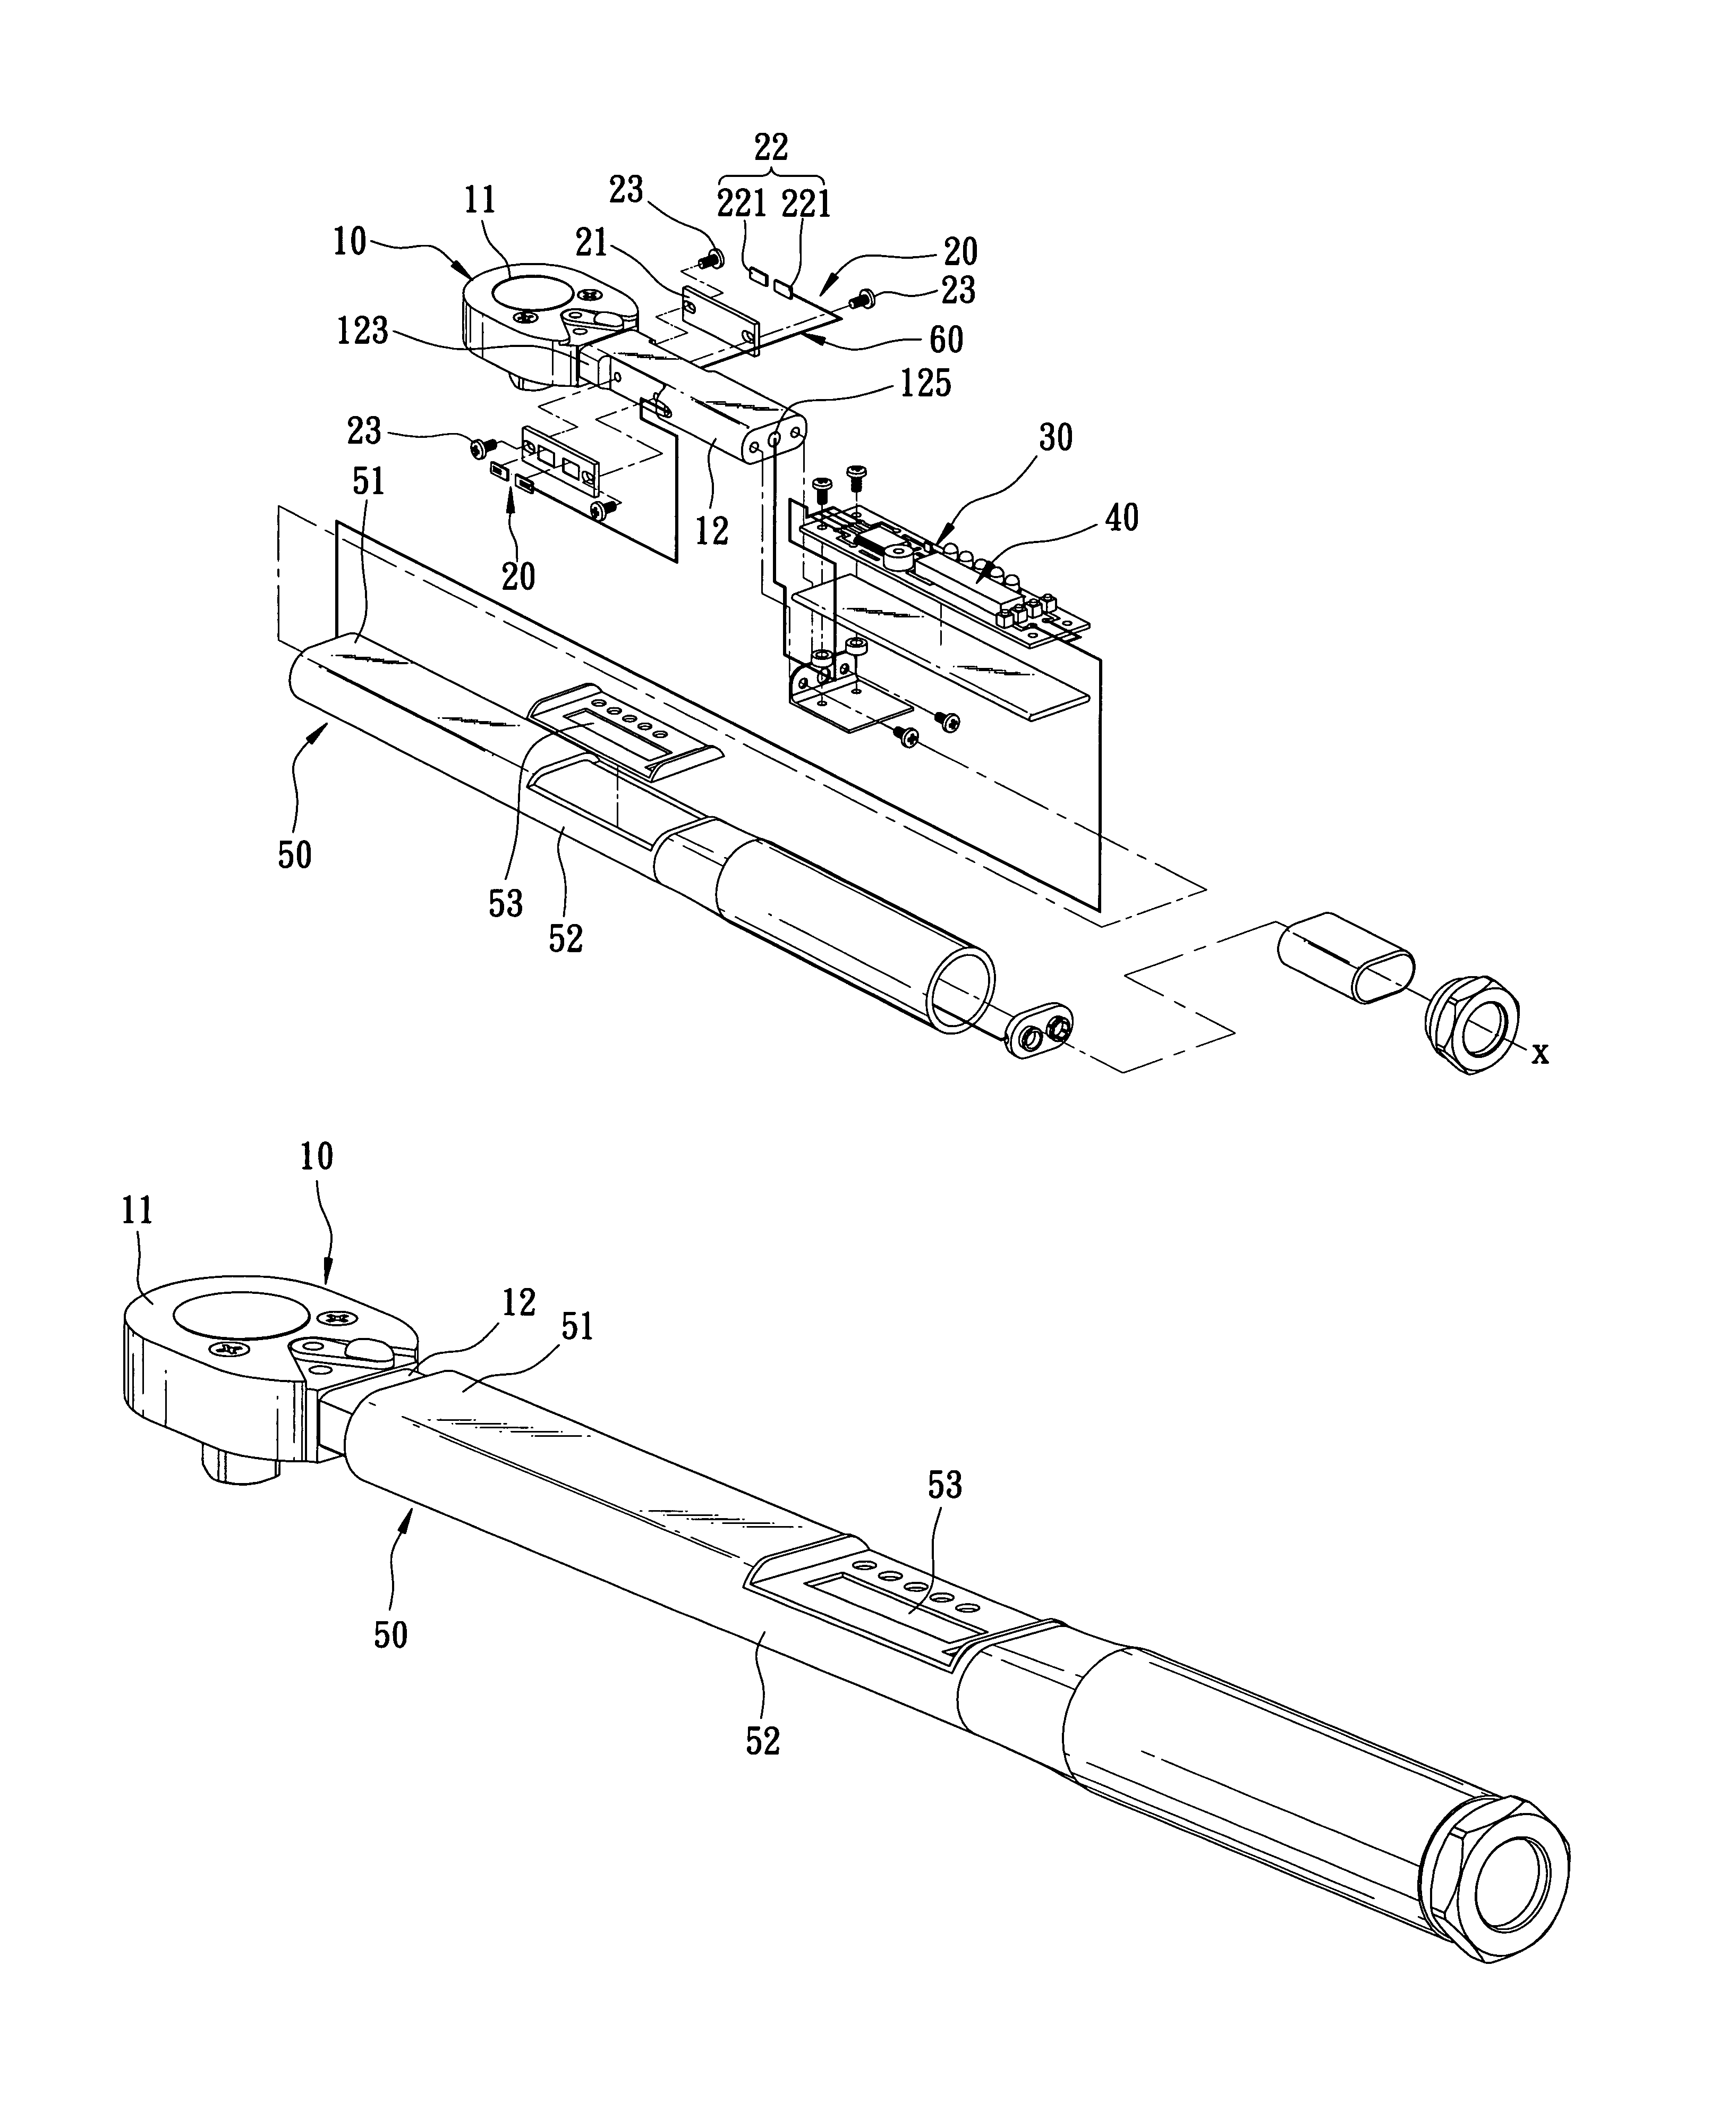 Torque-indicating wrench